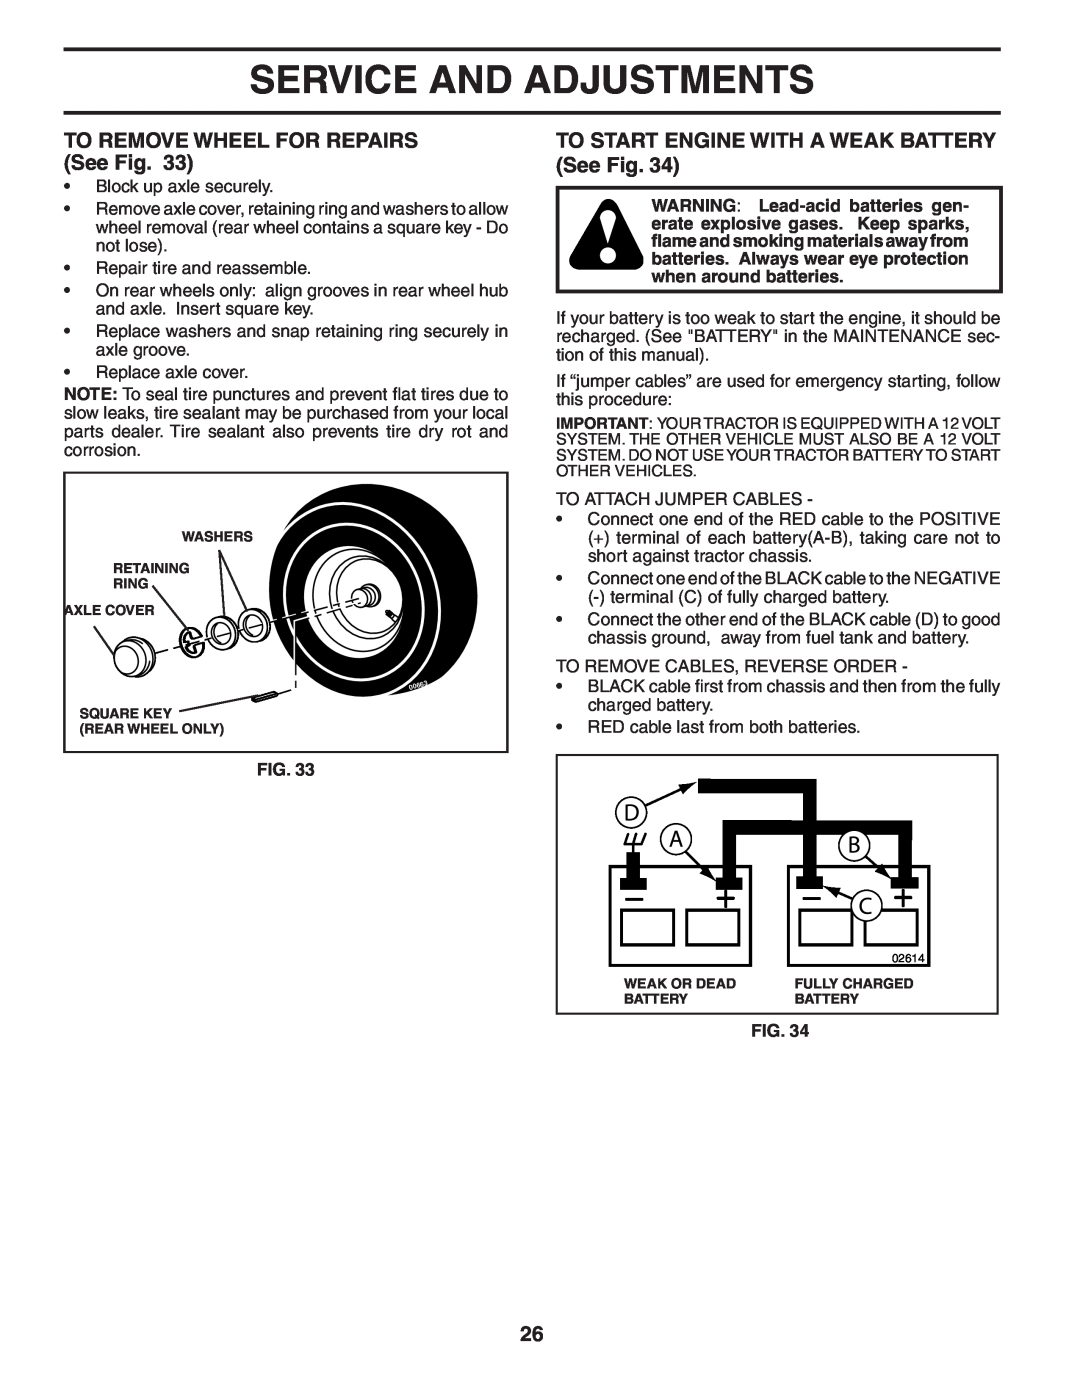 Husqvarna CTH180 XP owner manual TO REMOVE WHEEL FOR REPAIRS See Fig, TO START ENGINE WITH A WEAK BATTERY See Fig 